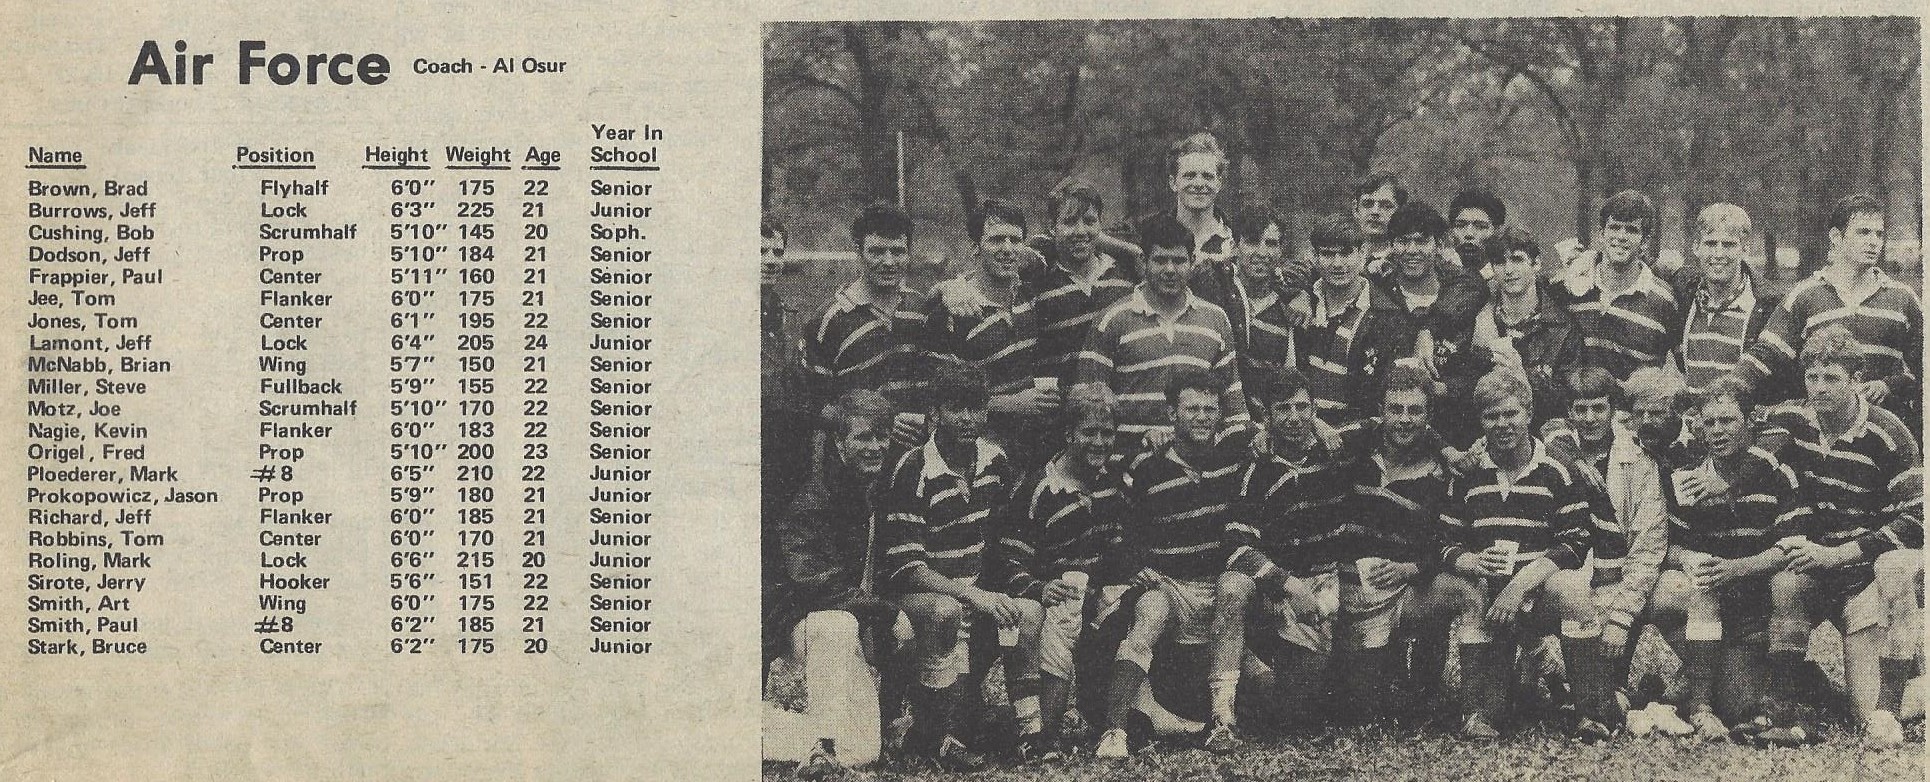 1980 Cham;pionship roster in Rugby.jpg